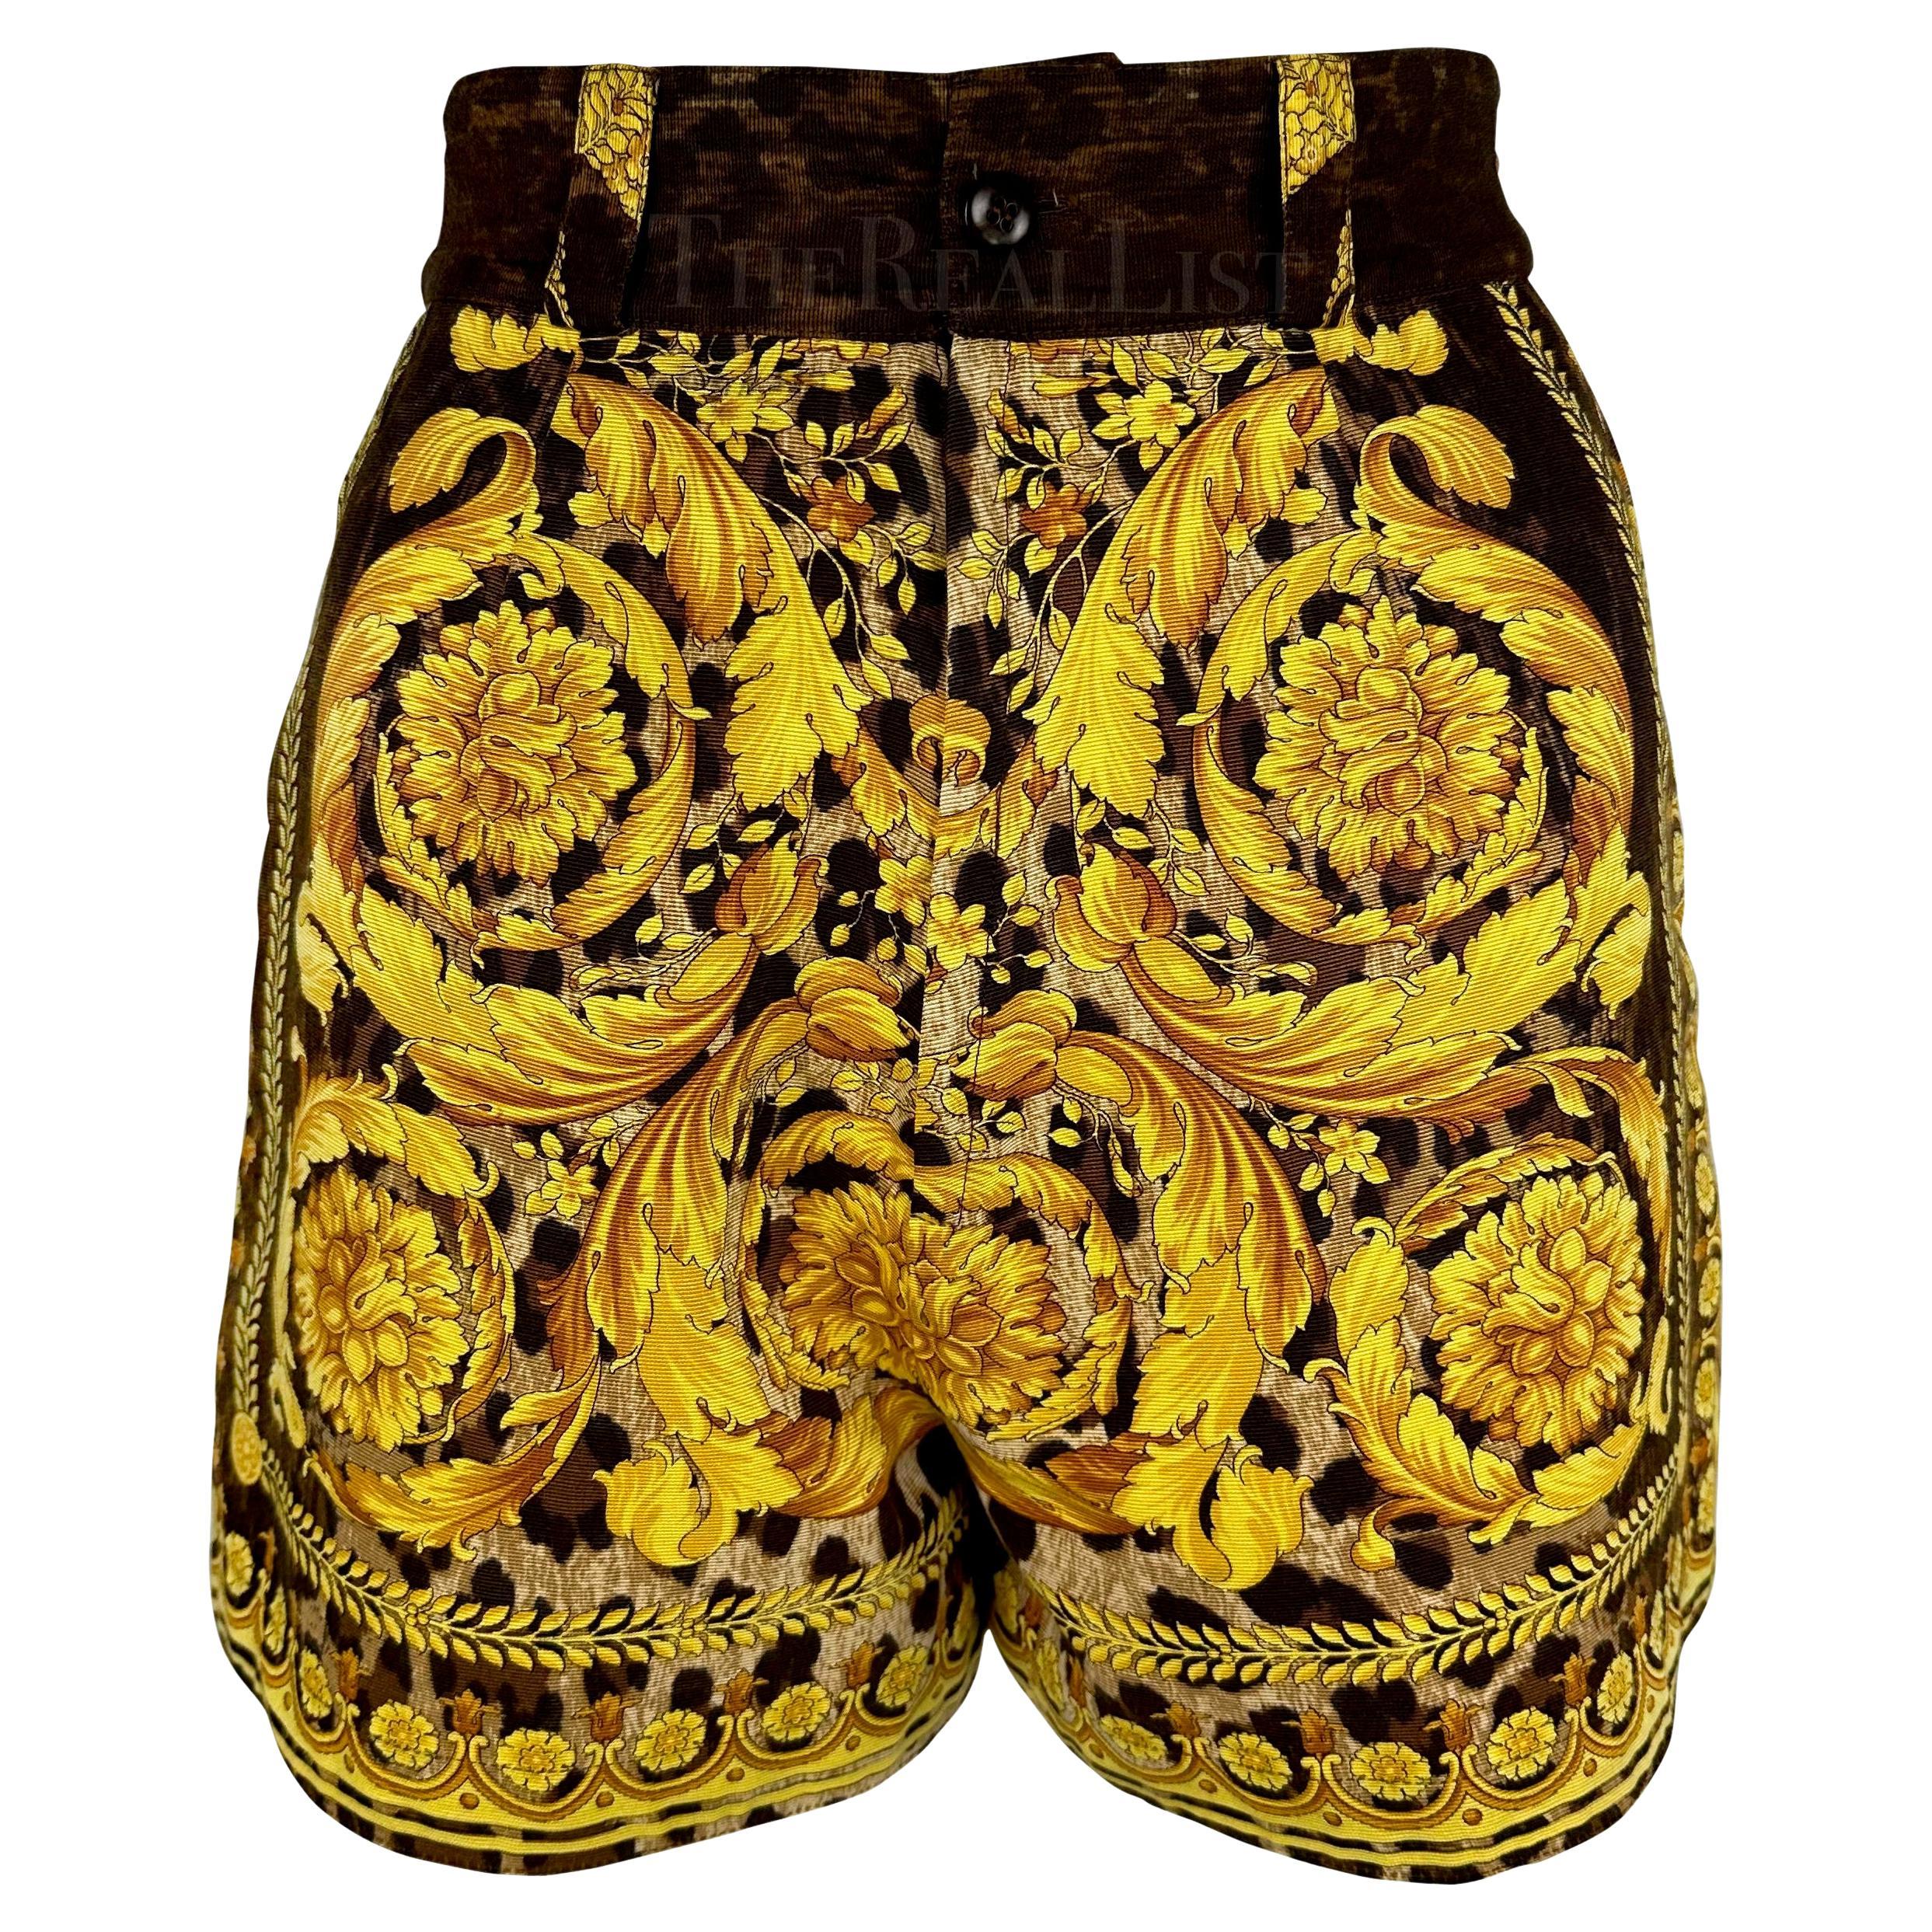 S/S 1992 Gianni Versace Runway Gold Baroque Leopard Print High Waisted Shorts